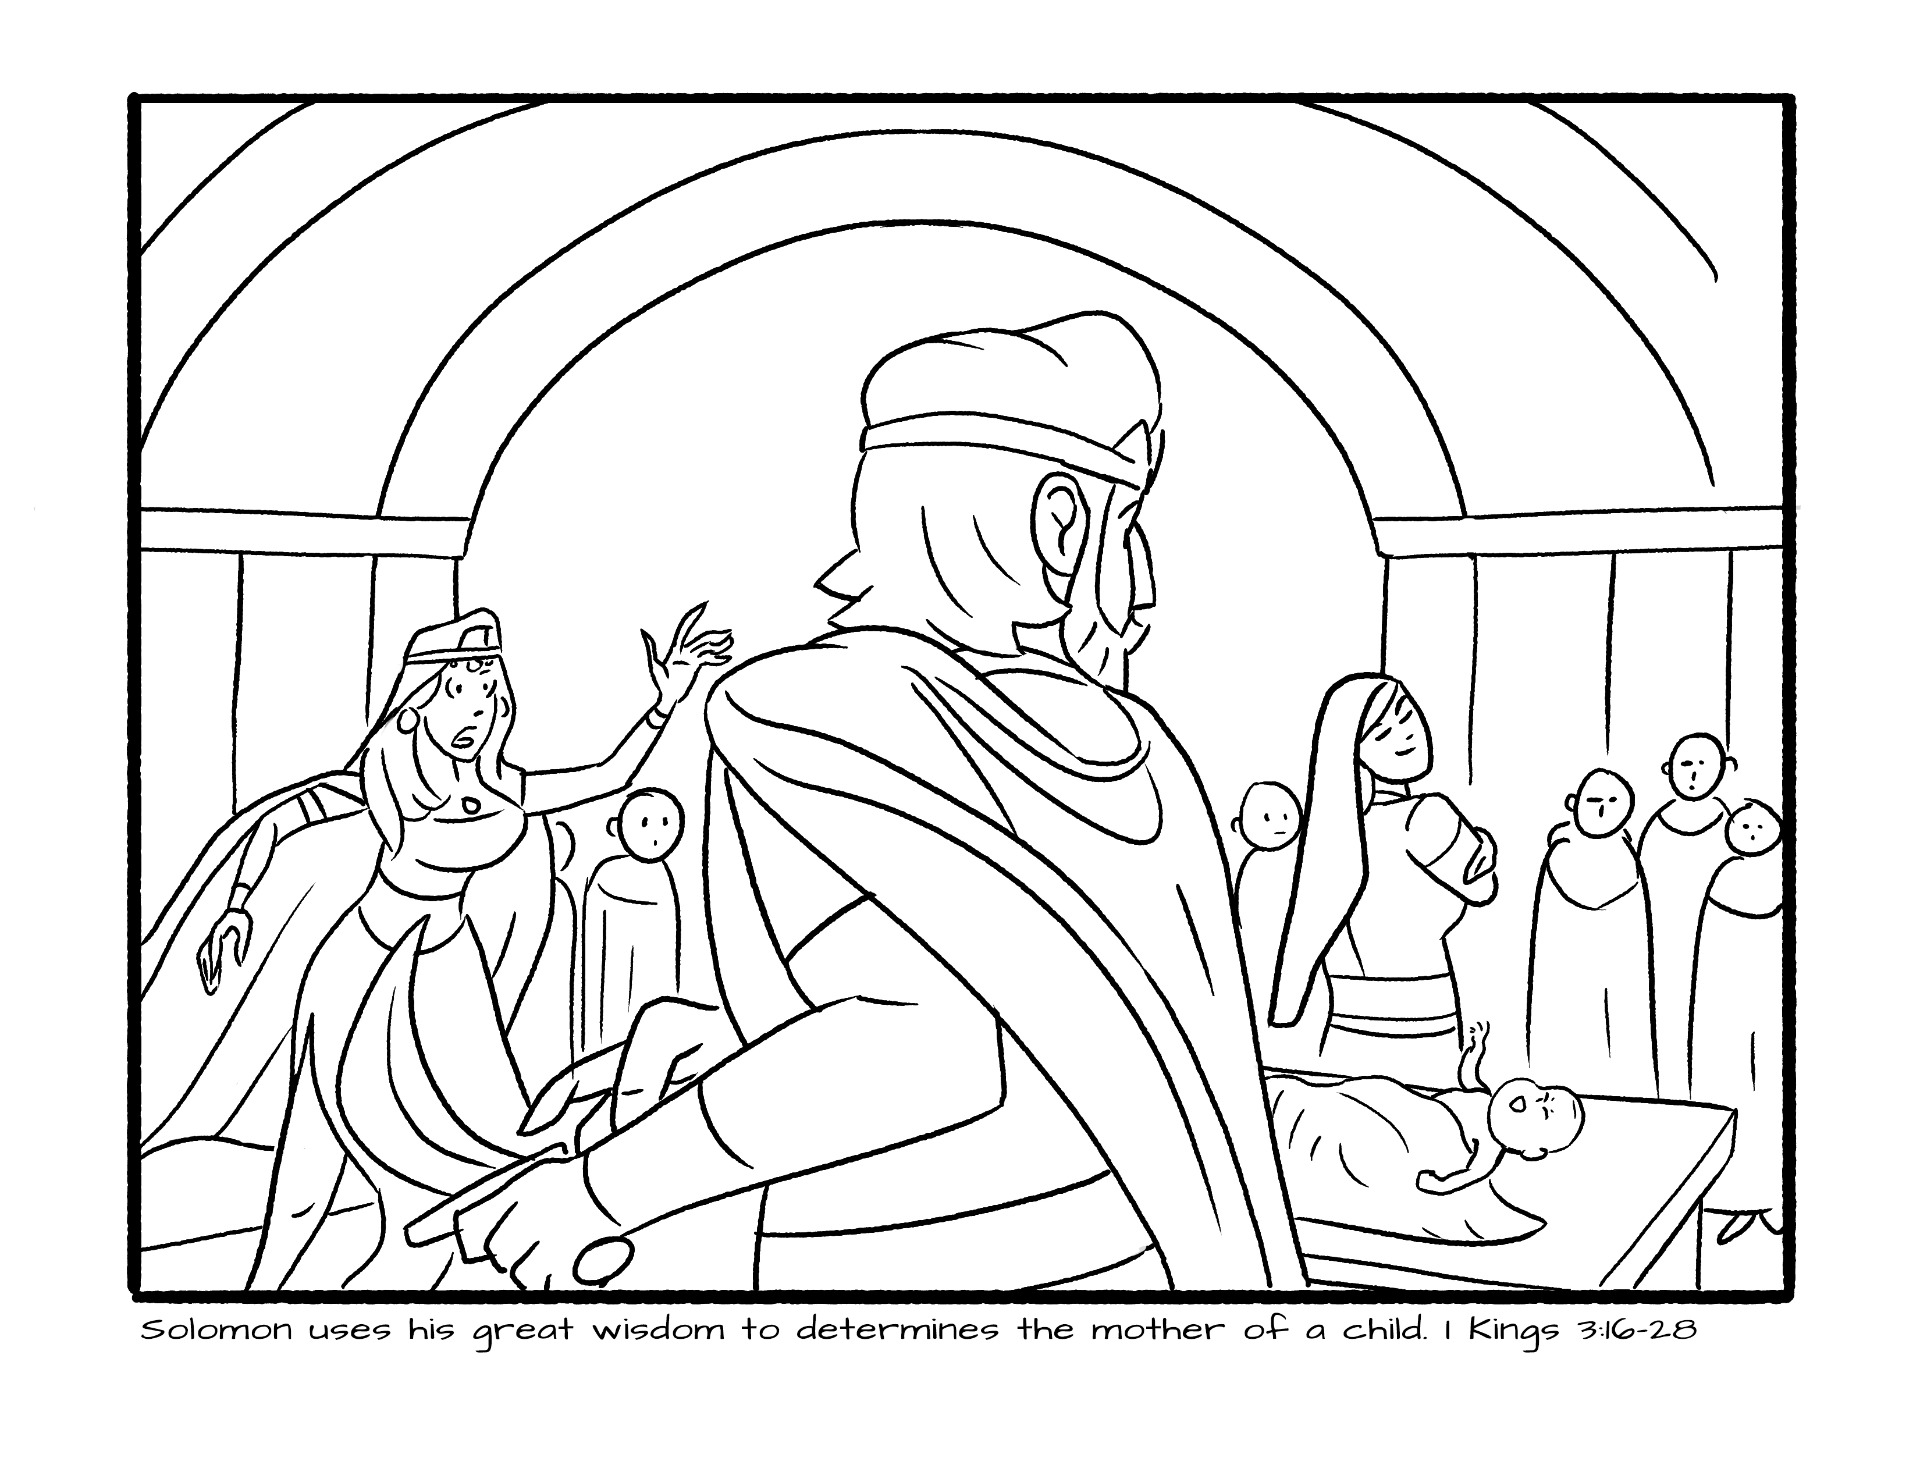 Coloring book solomon and the two mothers biblical toolbelt